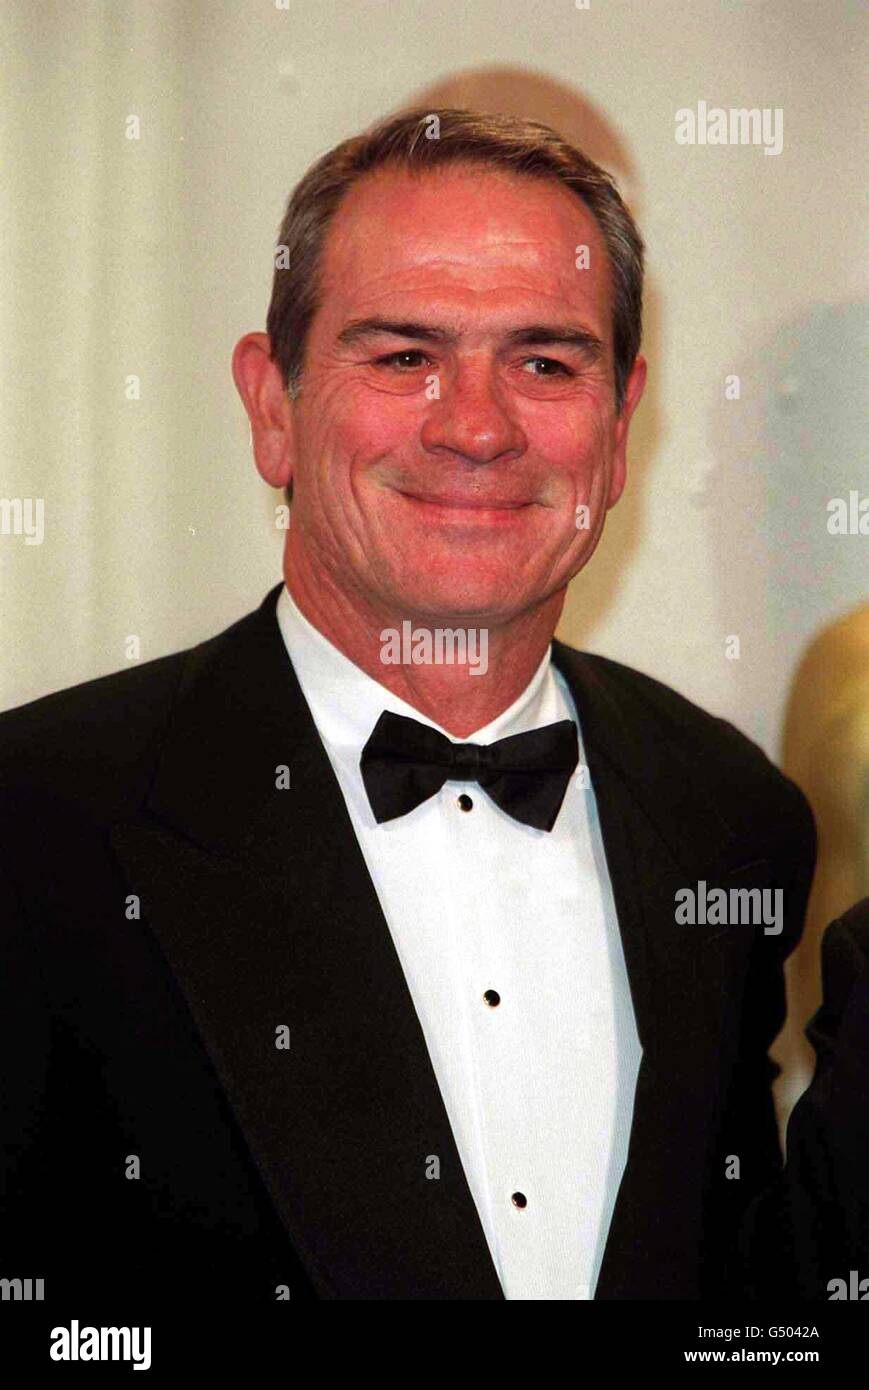 American actor Tommy Lee Jones at the 72nd Annual Academy Awards, held at the Shrine Auditorium in Los Angeles. Stock Photo